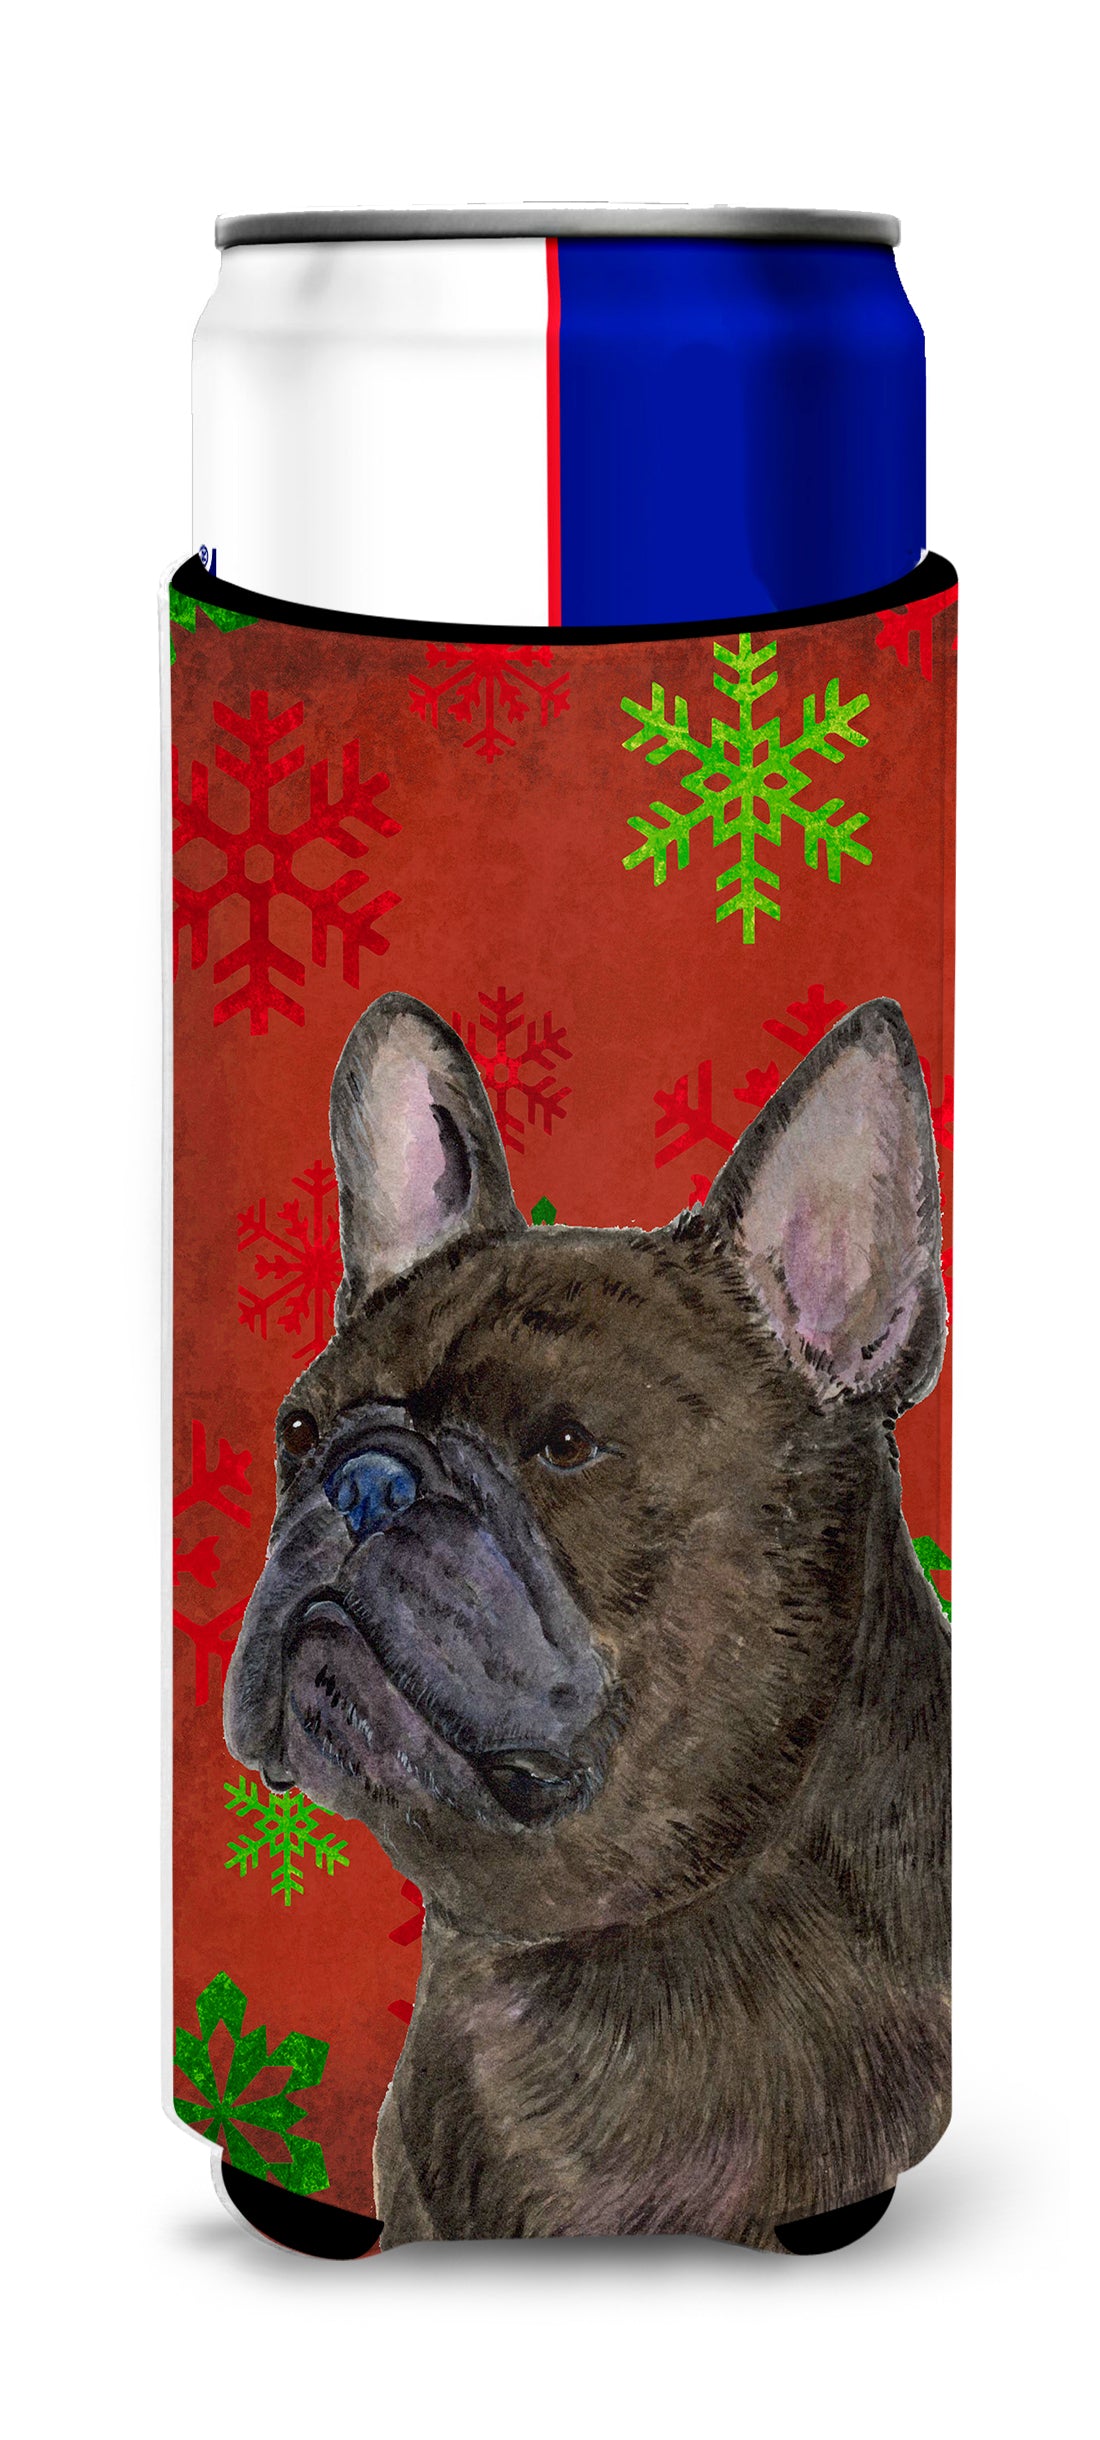 French Bulldog Red and Green Snowflakes Holiday Christmas Ultra Beverage Insulators for slim cans SS4726MUK